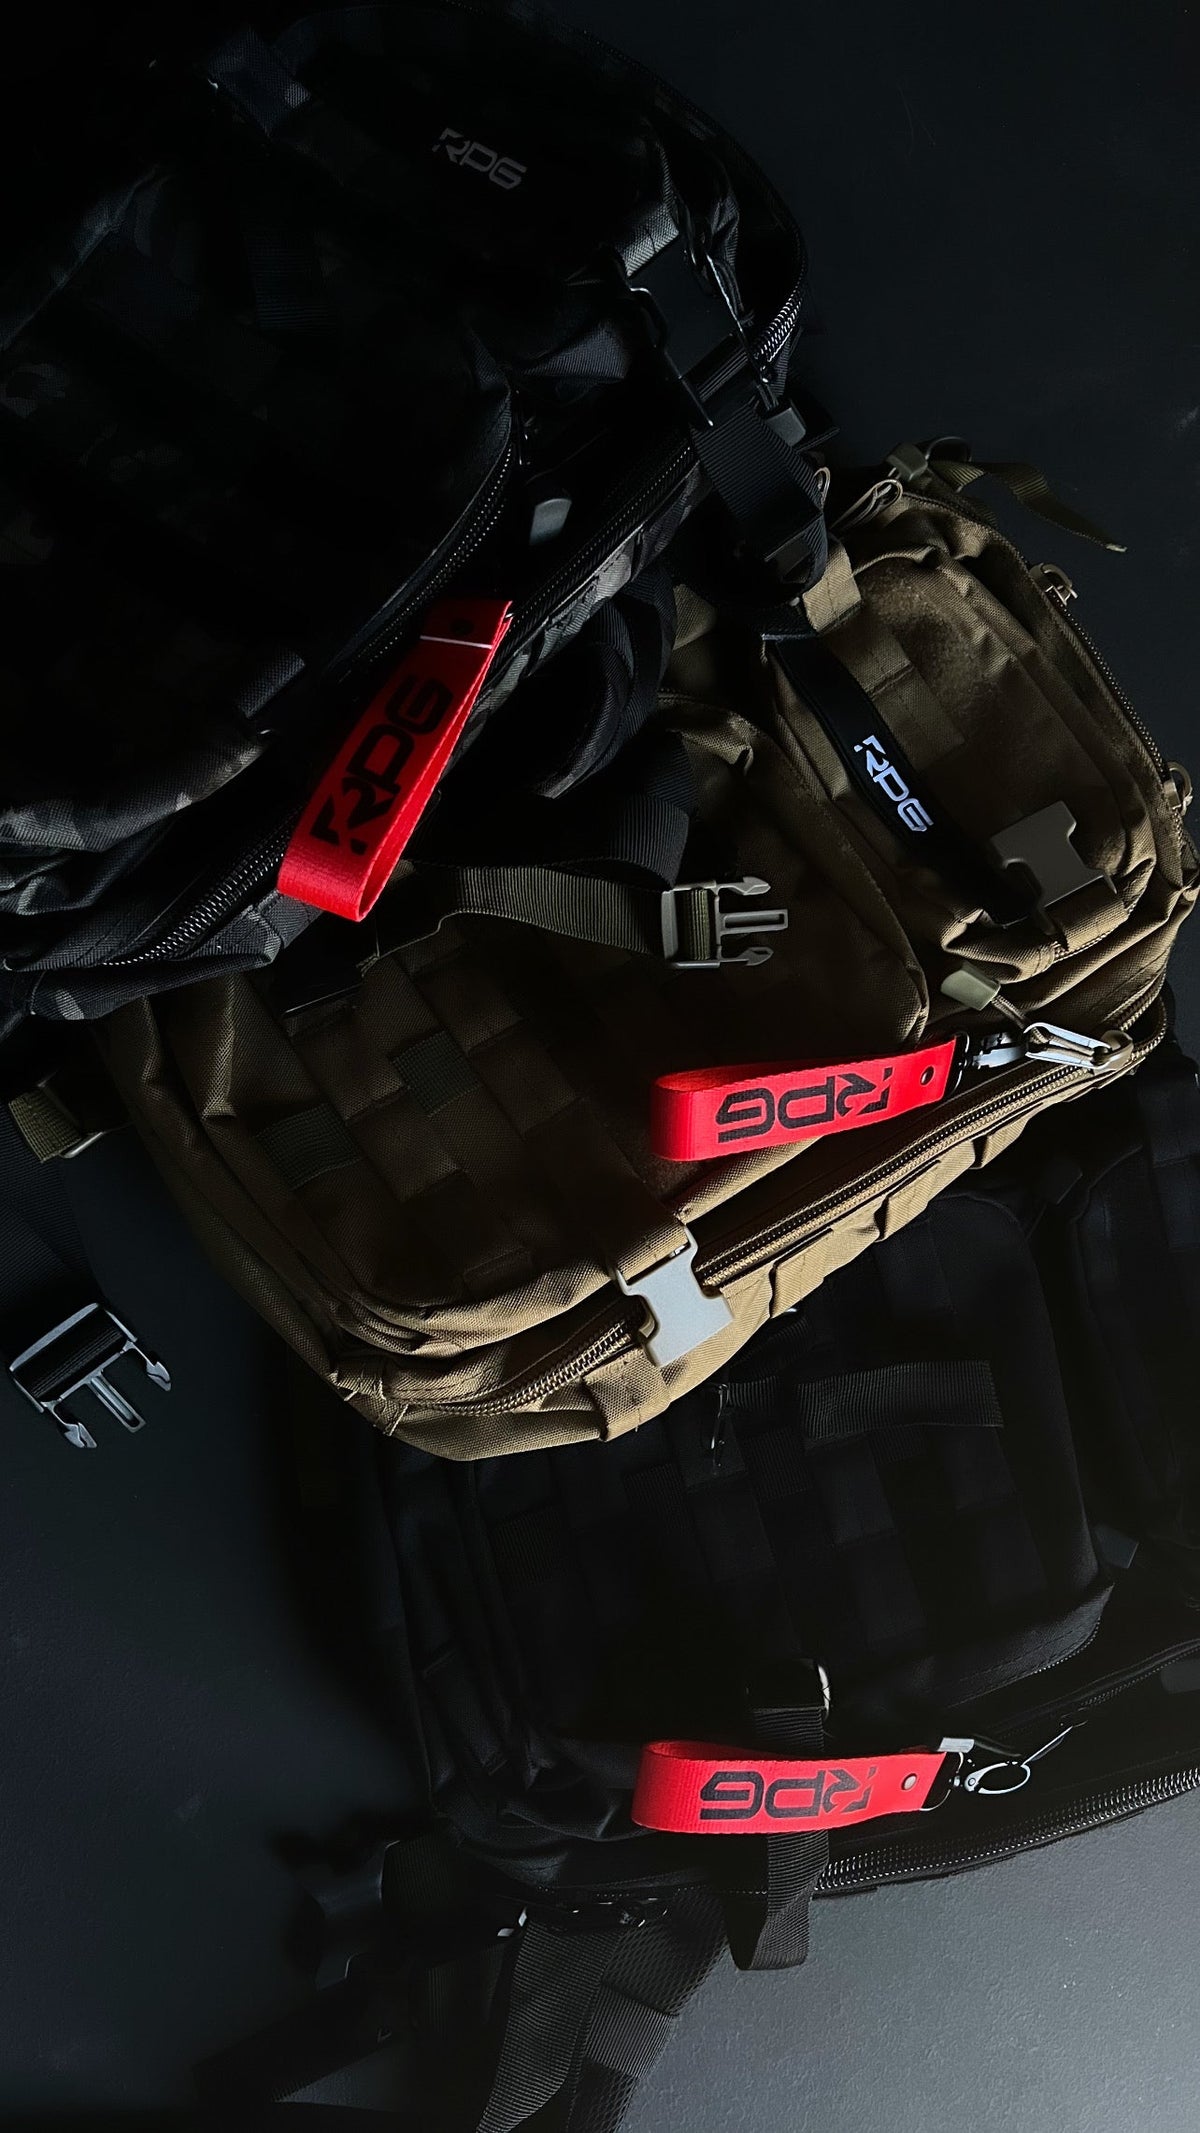 RPG SMALL ASSAULT BACKPACK (BLACK CAMO)